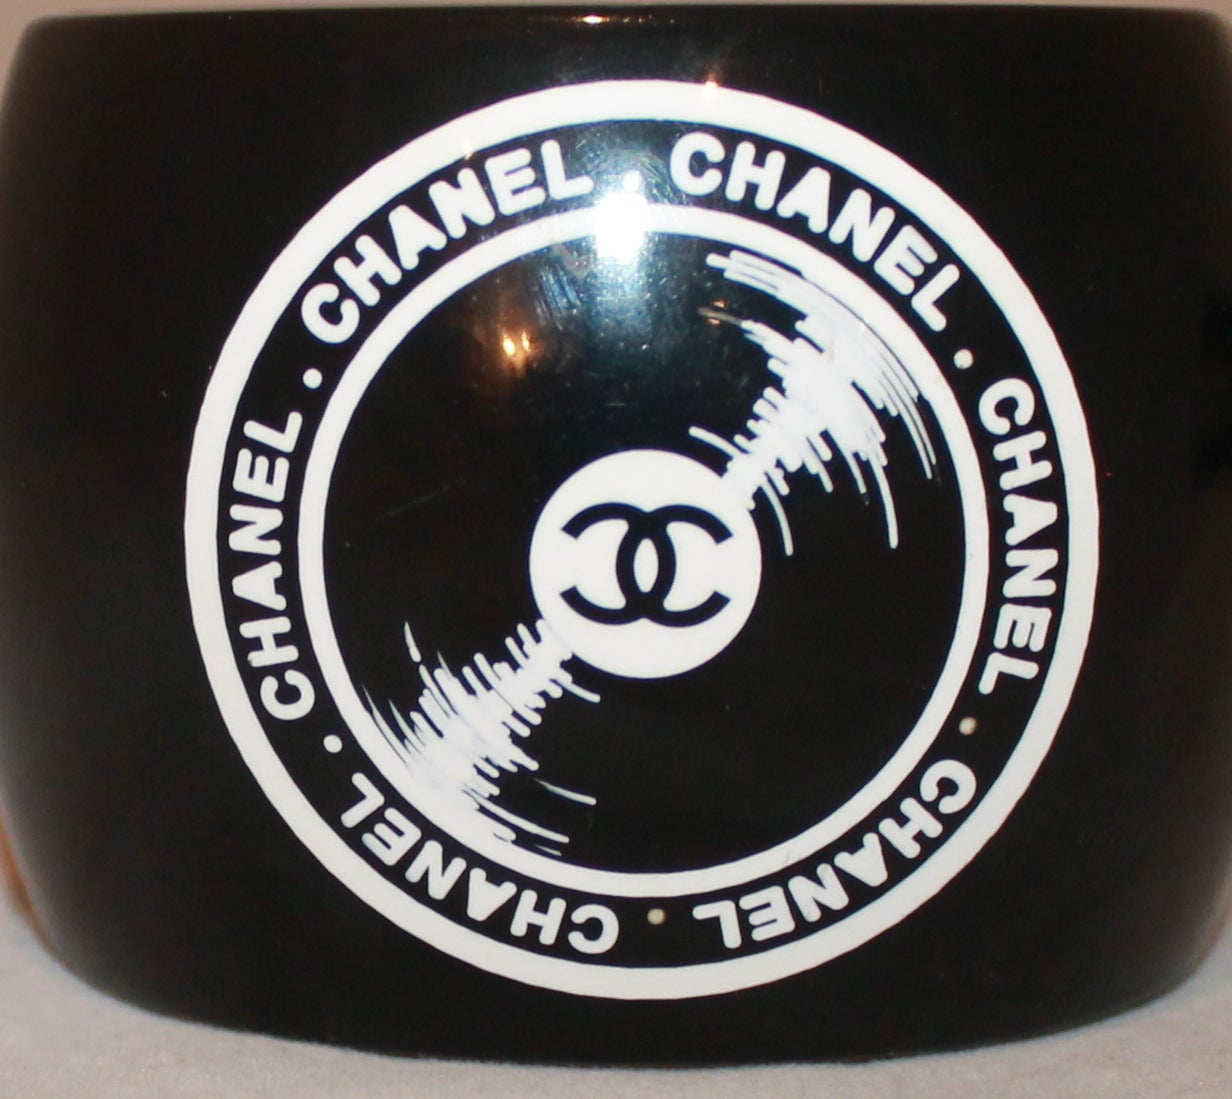 Chanel Black Record Player Collection Cuff - circa 2004. This cuff was a limited time piece and is now a collector's item. It is in excellent condition.

Width- 2.25